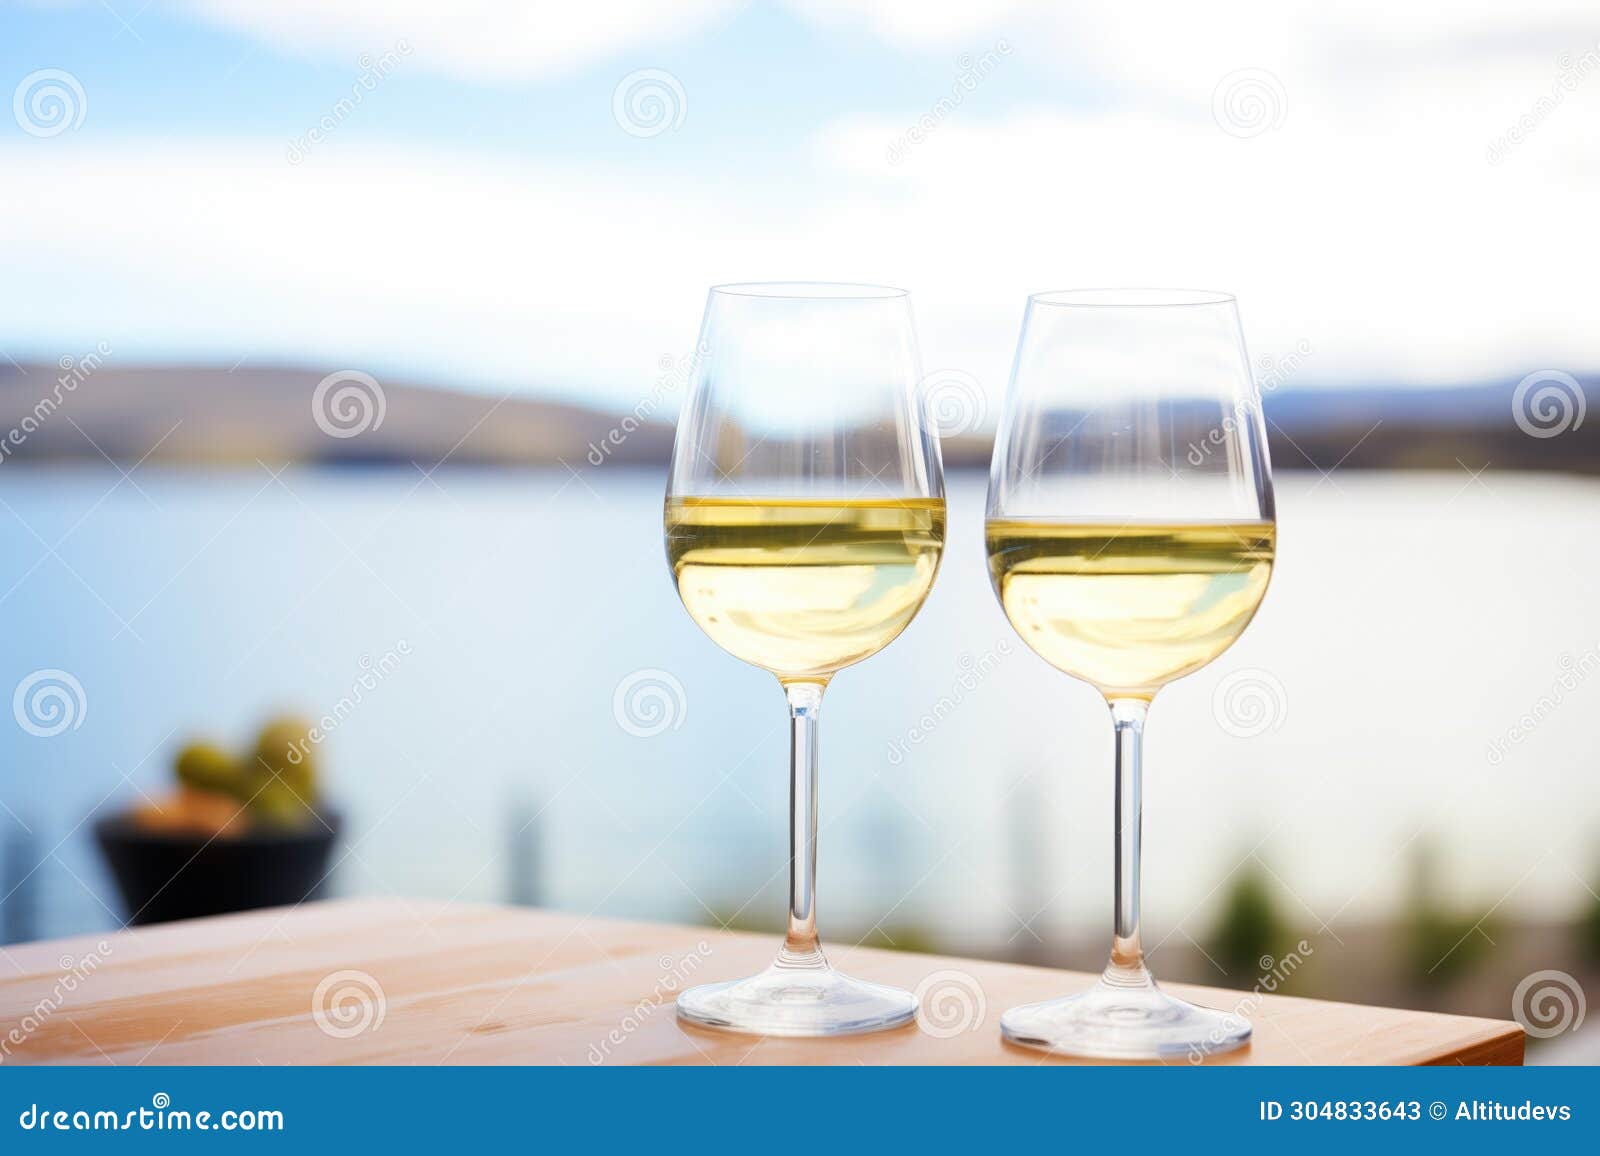 glasses of pinot grigio against a lake view